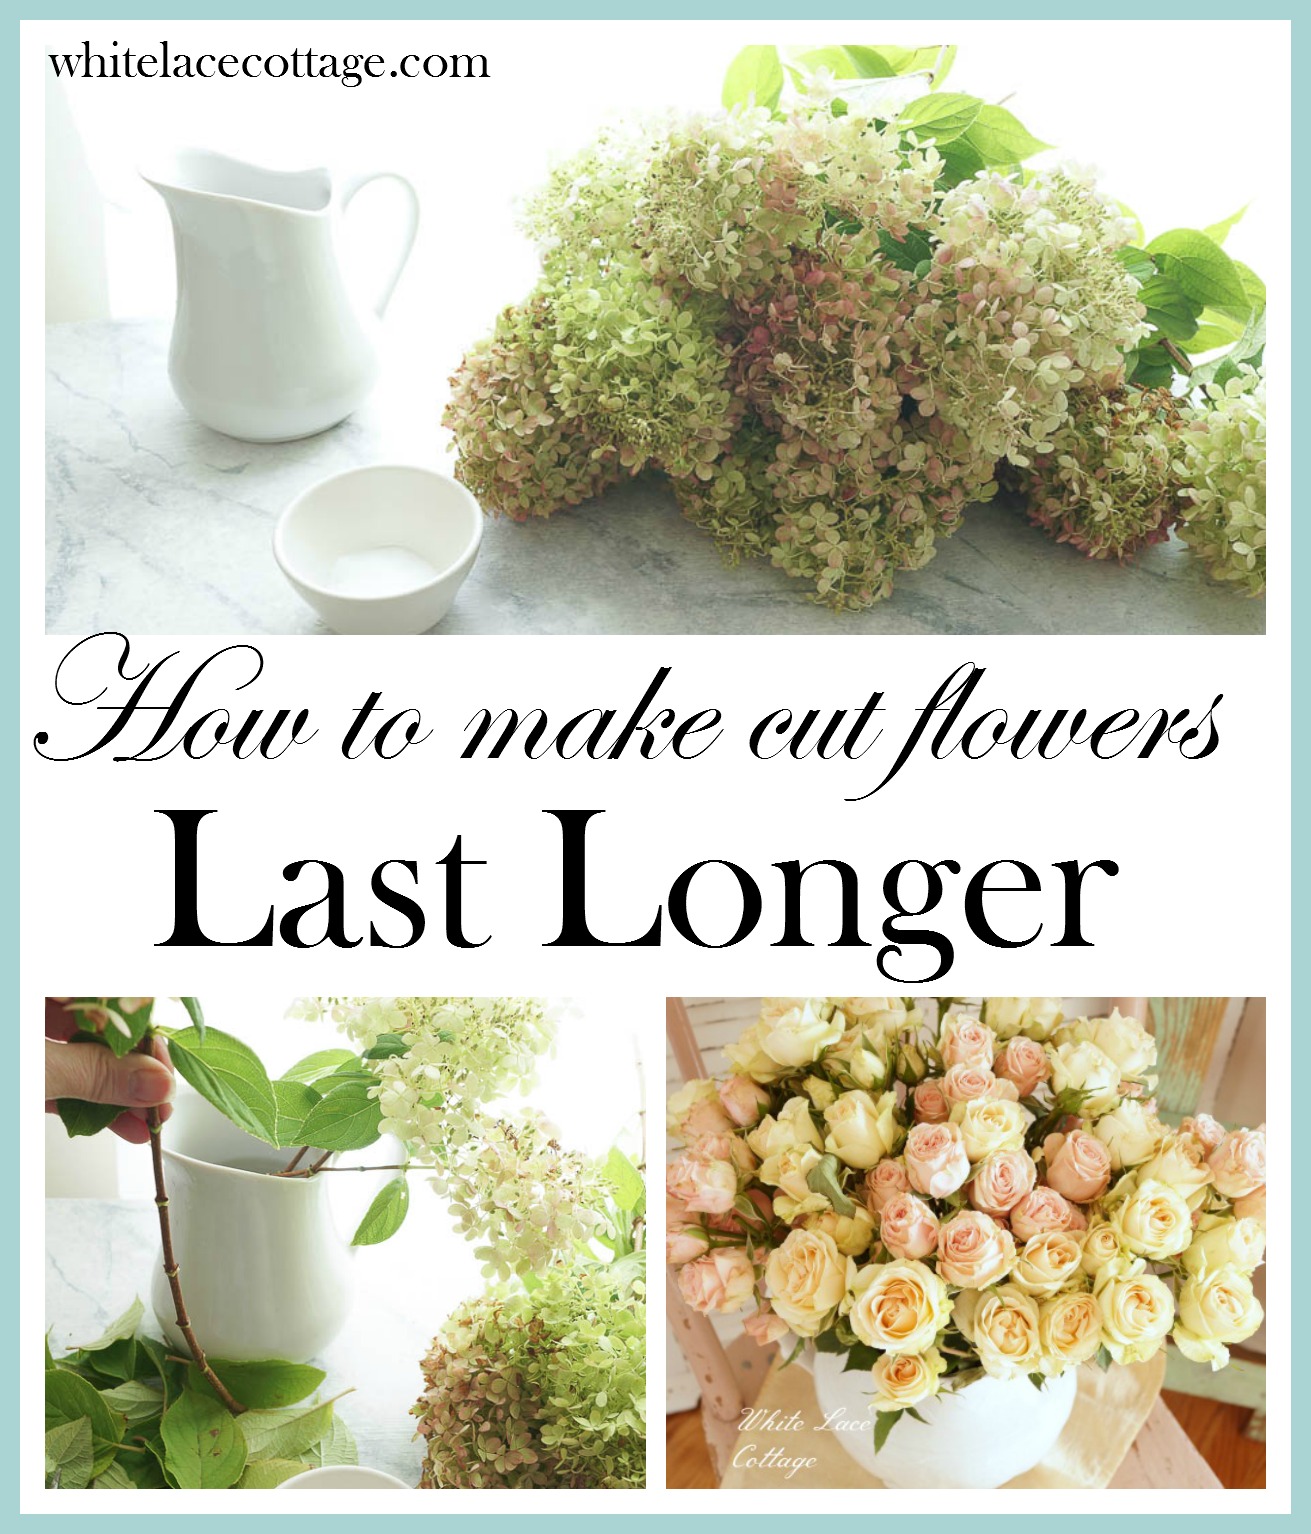 How To Make Cut Flowers Last Longer - White Lace Cottage